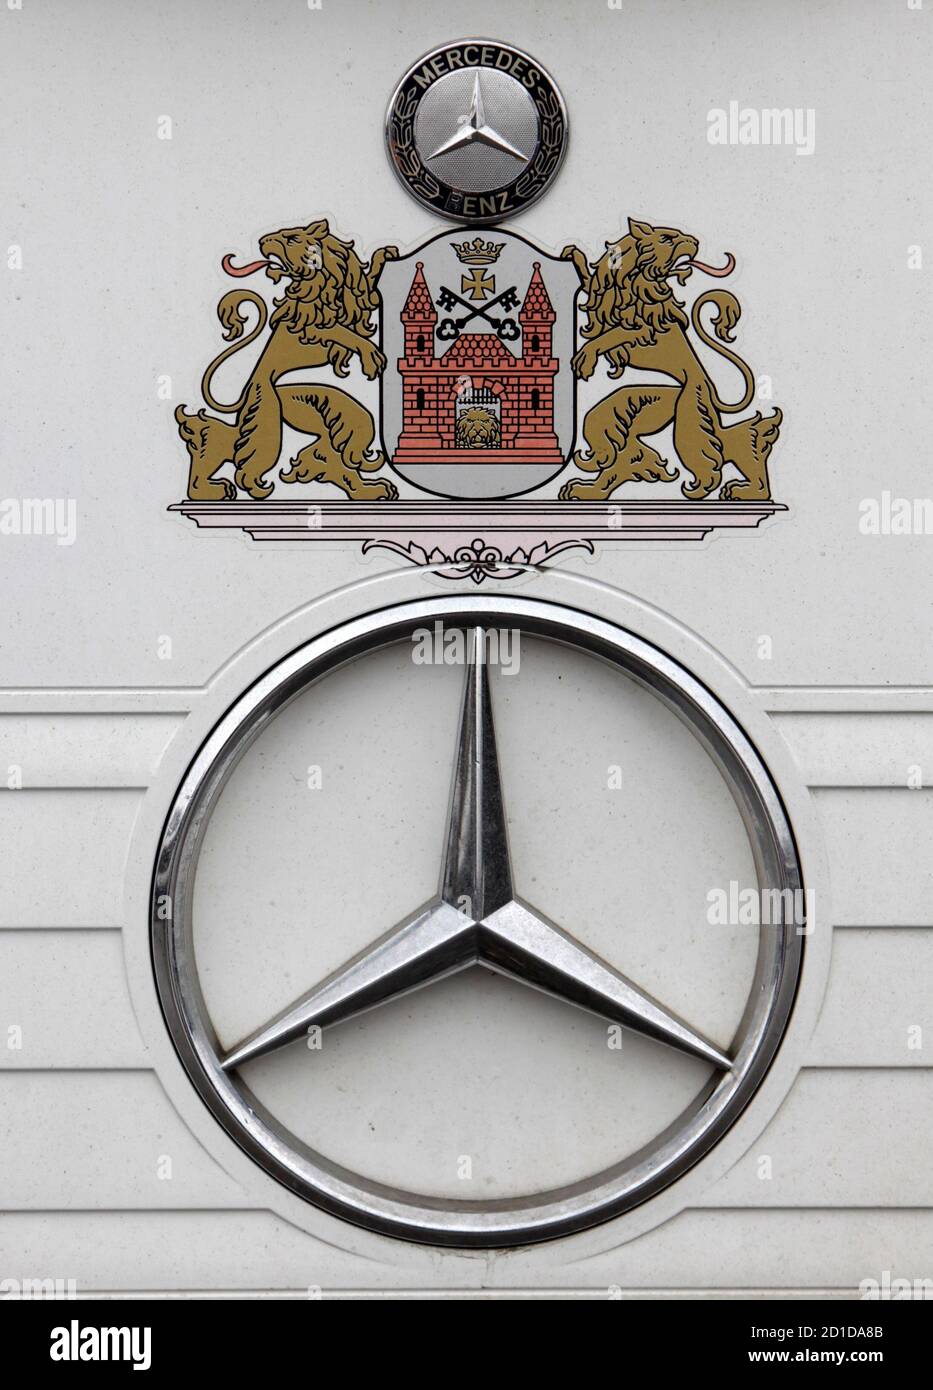 A Mercedes trademark and the Riga city logo are seen on a public bus in  Riga March 26, 2010. Car and truck manufacturer Daimler AG allegedly earned  $1.9 billion in revenue and